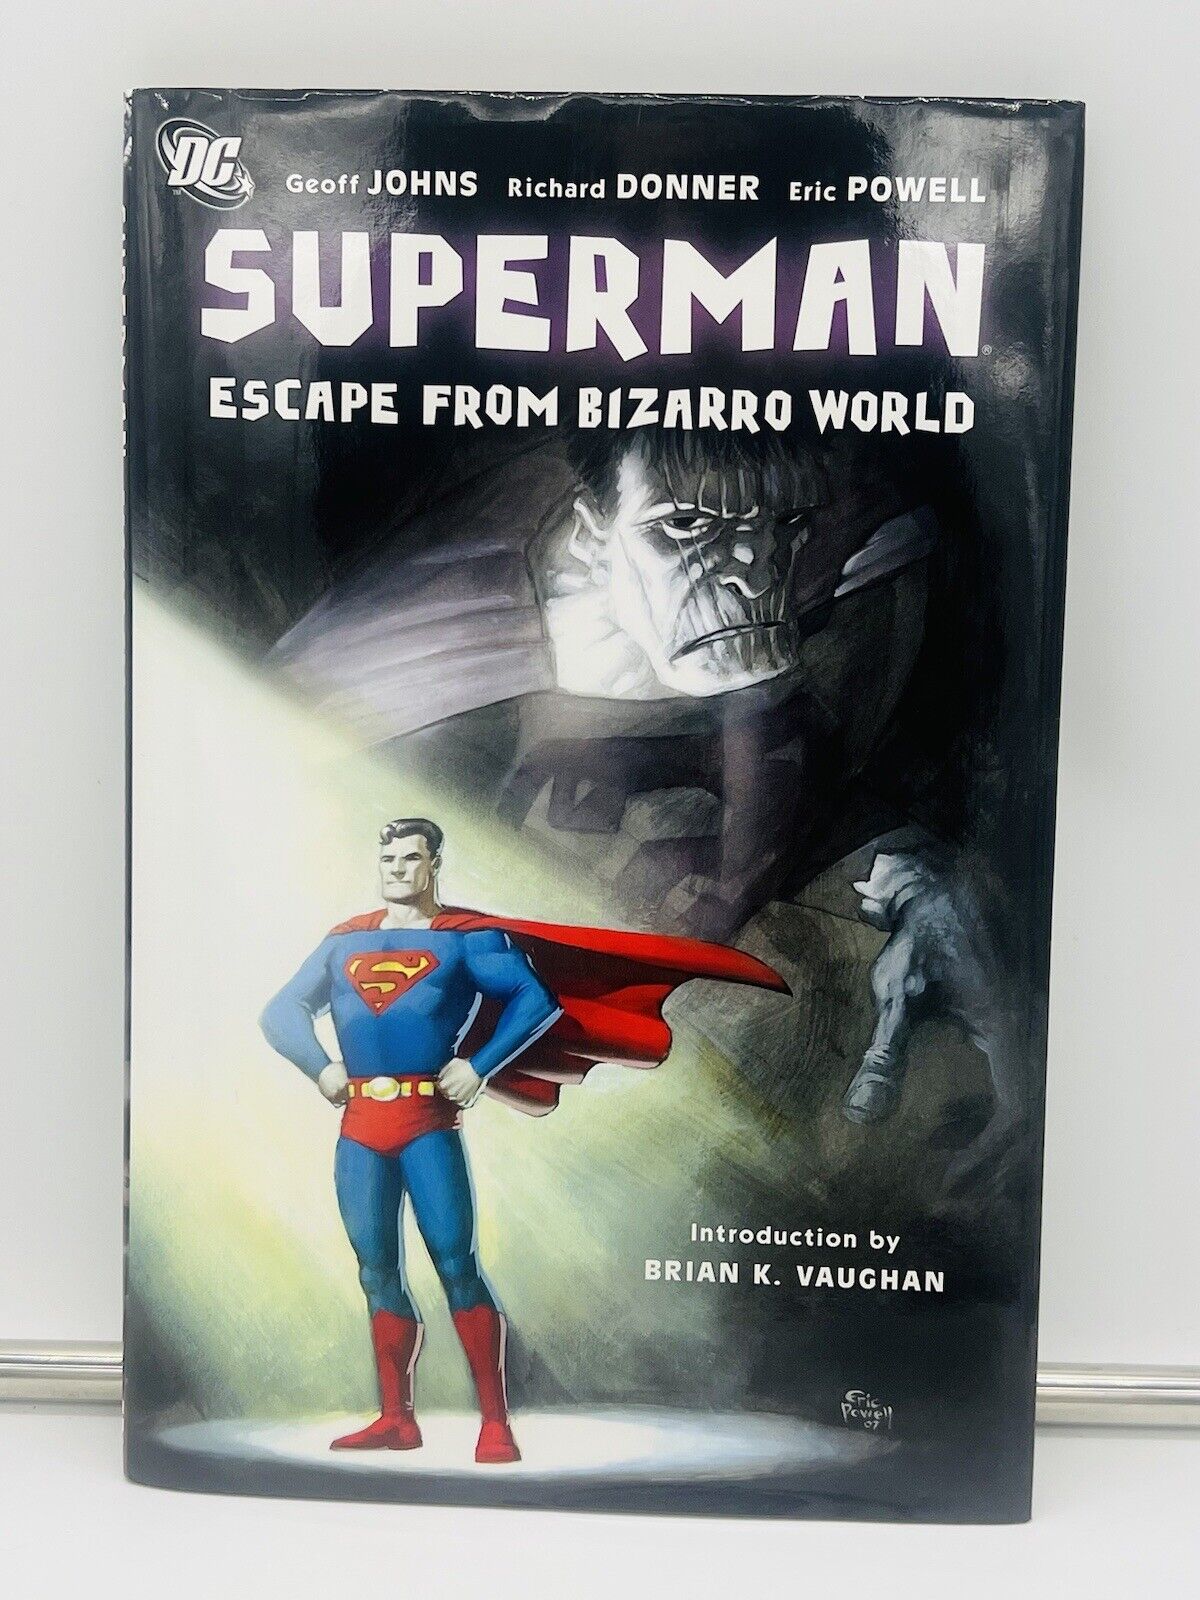 SUPERMAN: ESCAPE FROM BIZARRO WORLD By Geoff Johns & Richard Donner - Hardcover